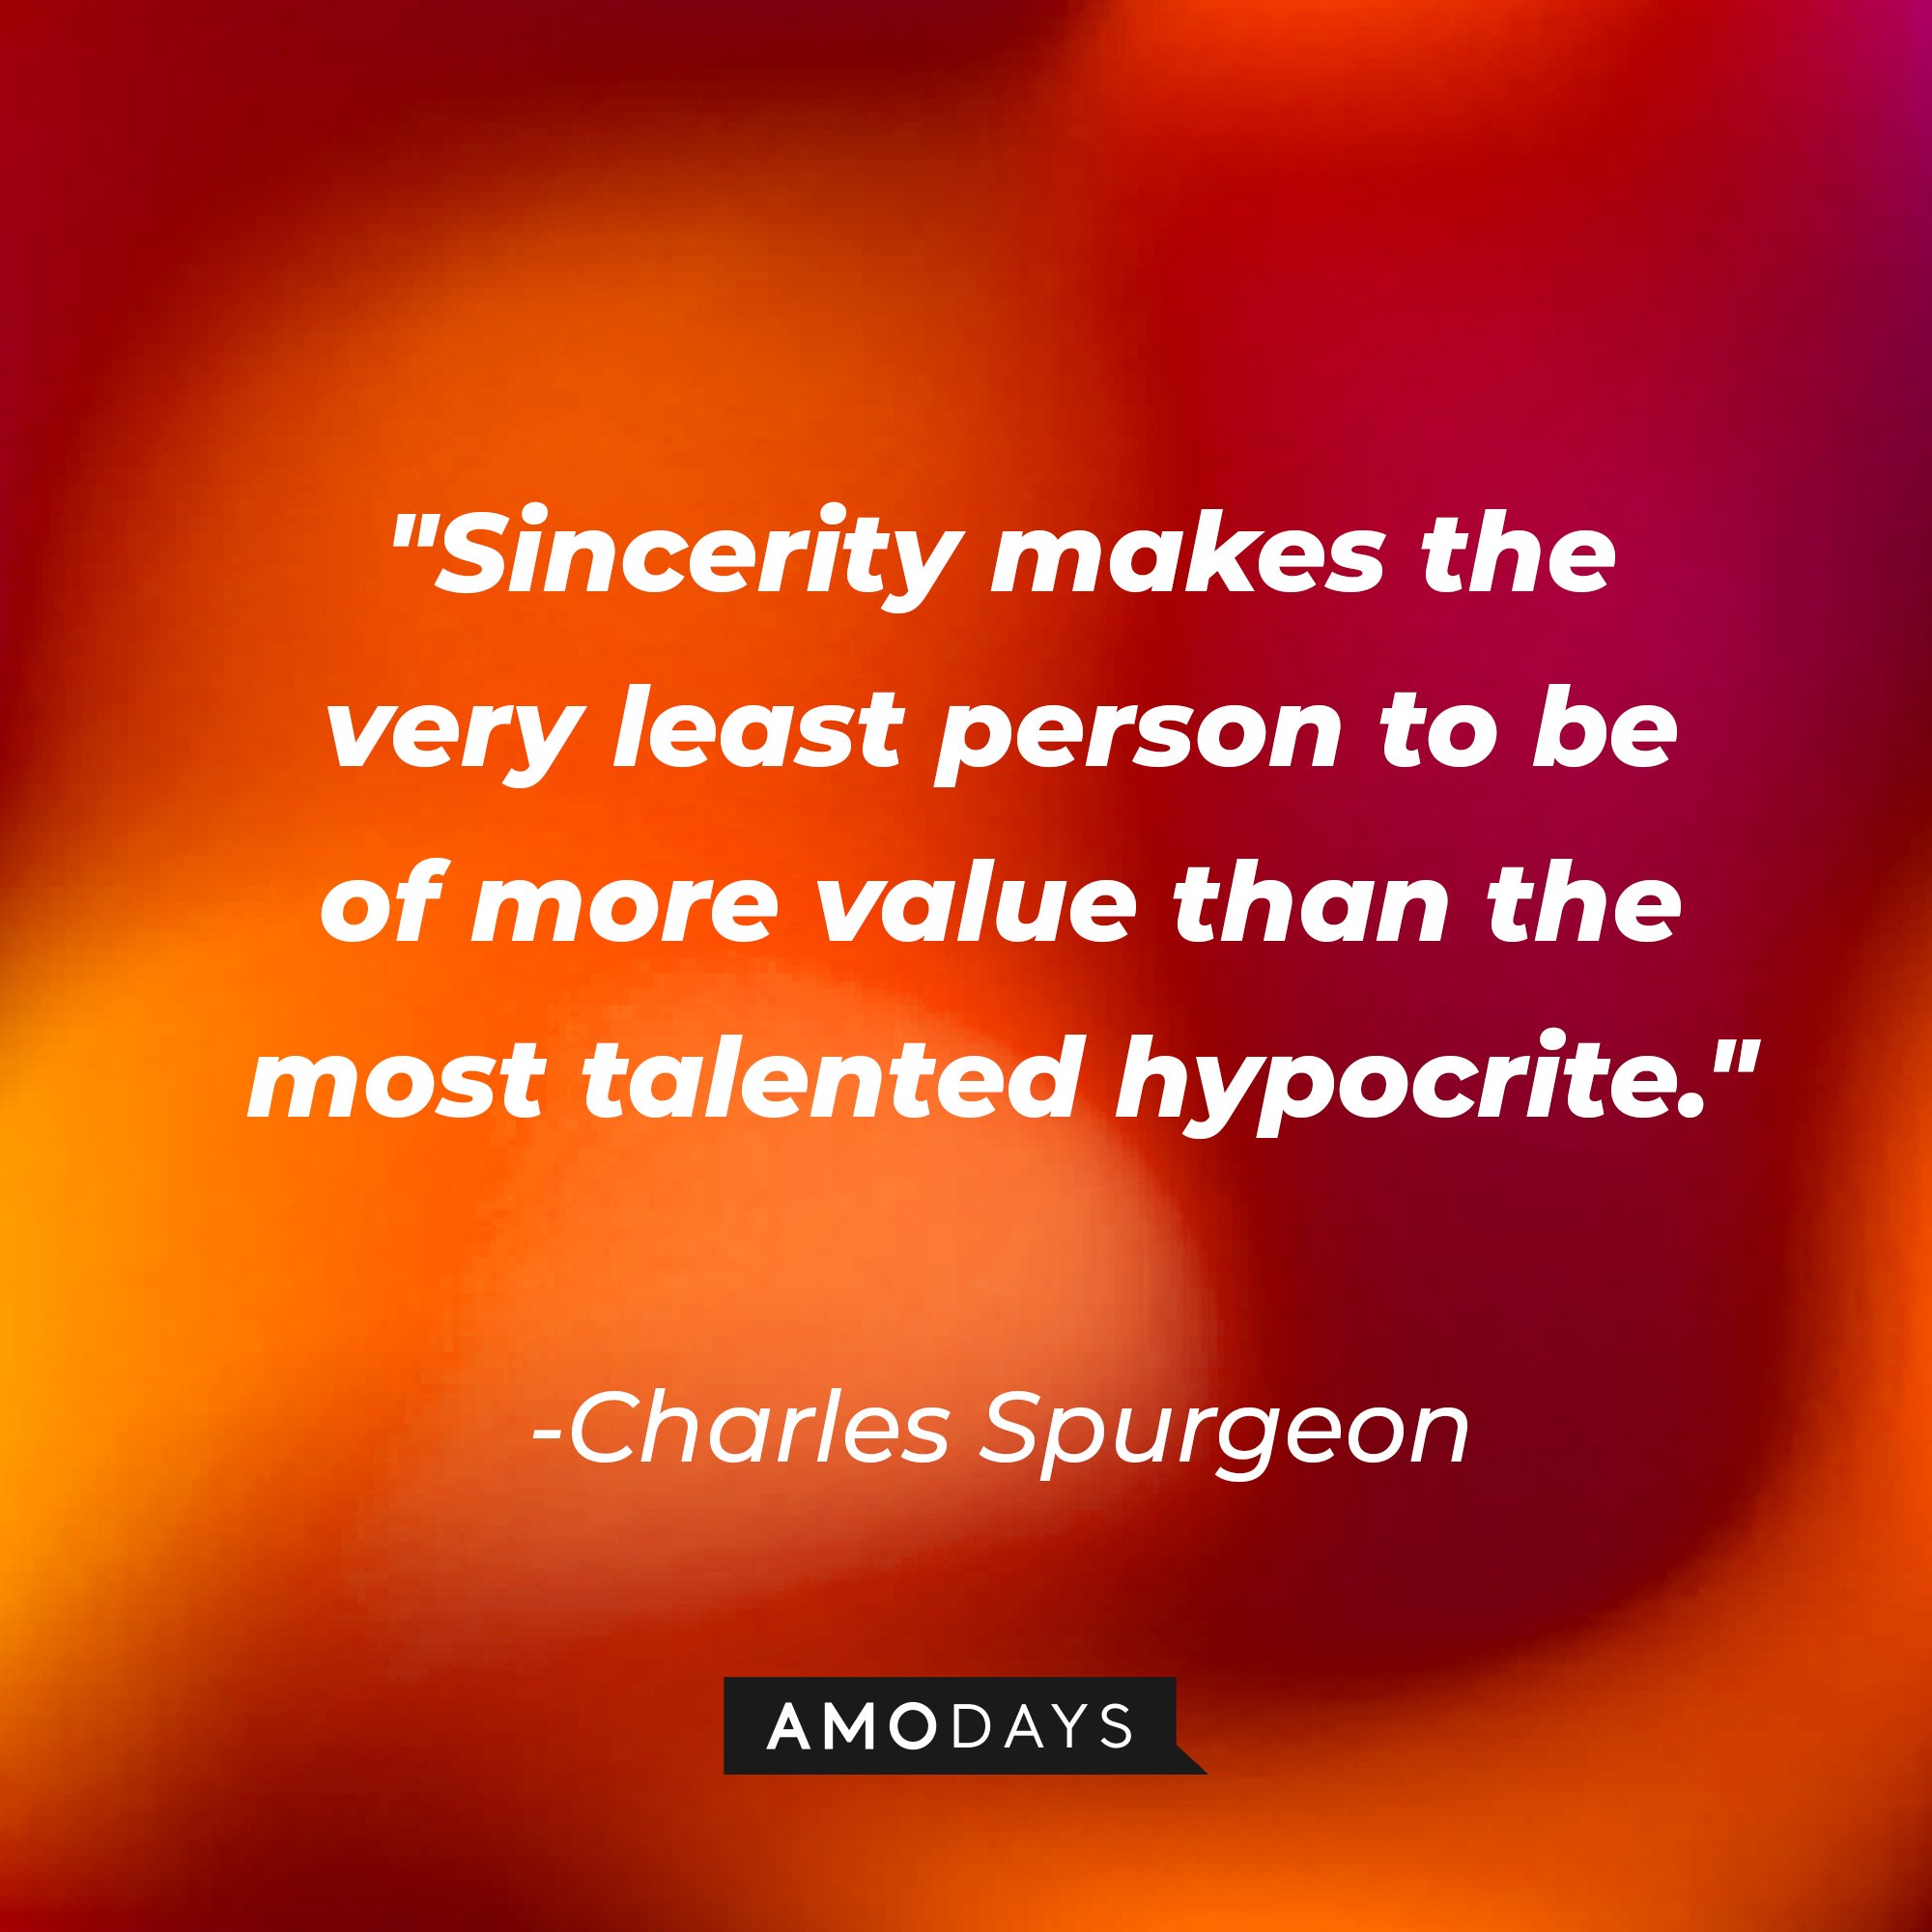 Charles Spurgeon's quote:\\\\\\\\\\\\\\\\u00a0"Sincerity makes the very least person to be of more value than the most talented hypocrite."\\\\\\\\\\\\\\\\u00a0| Image: AmoDays